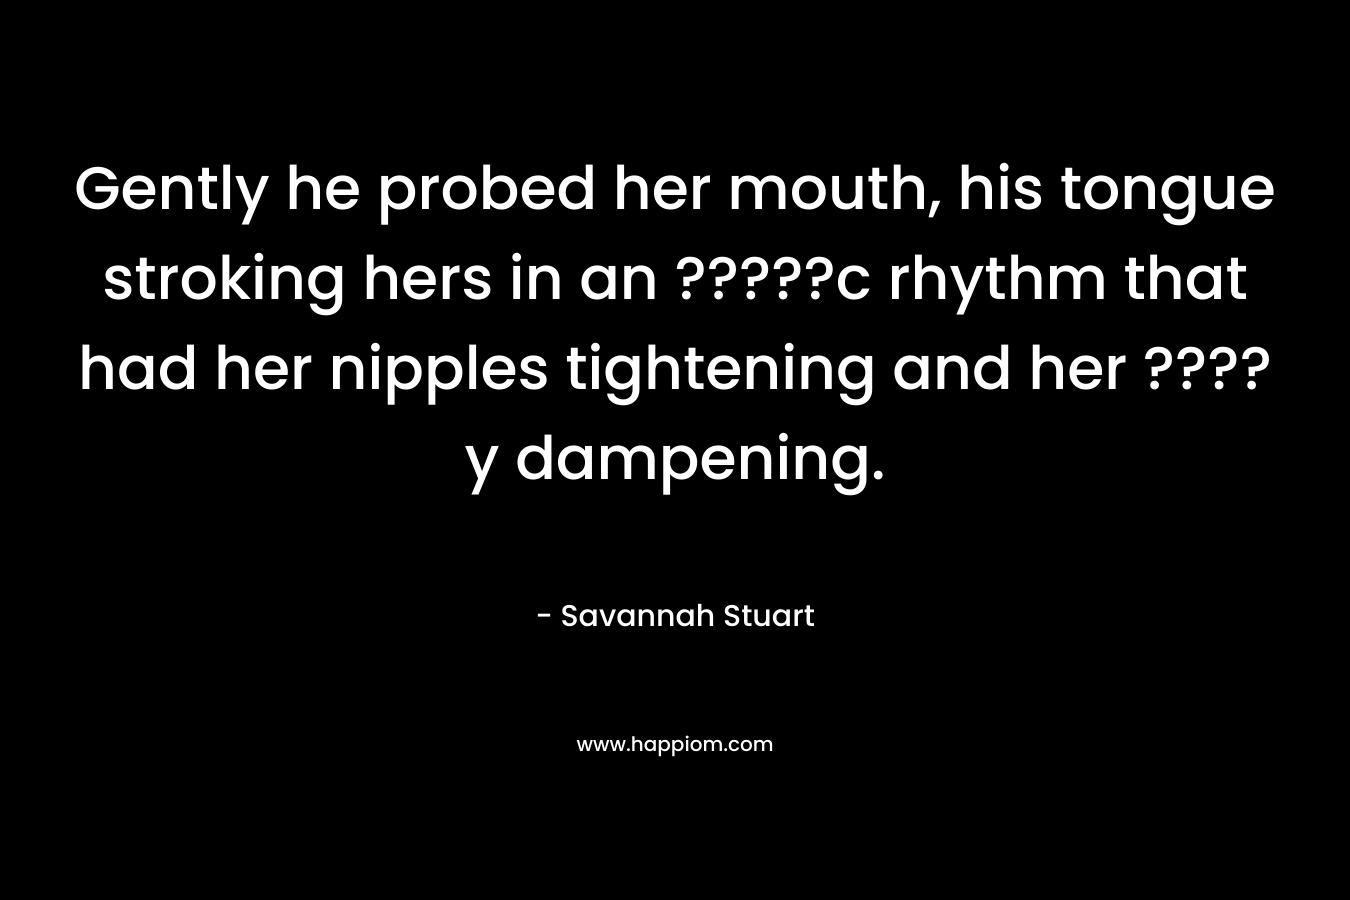 Gently he probed her mouth, his tongue stroking hers in an ?????c rhythm that had her nipples tightening and her ????y dampening.